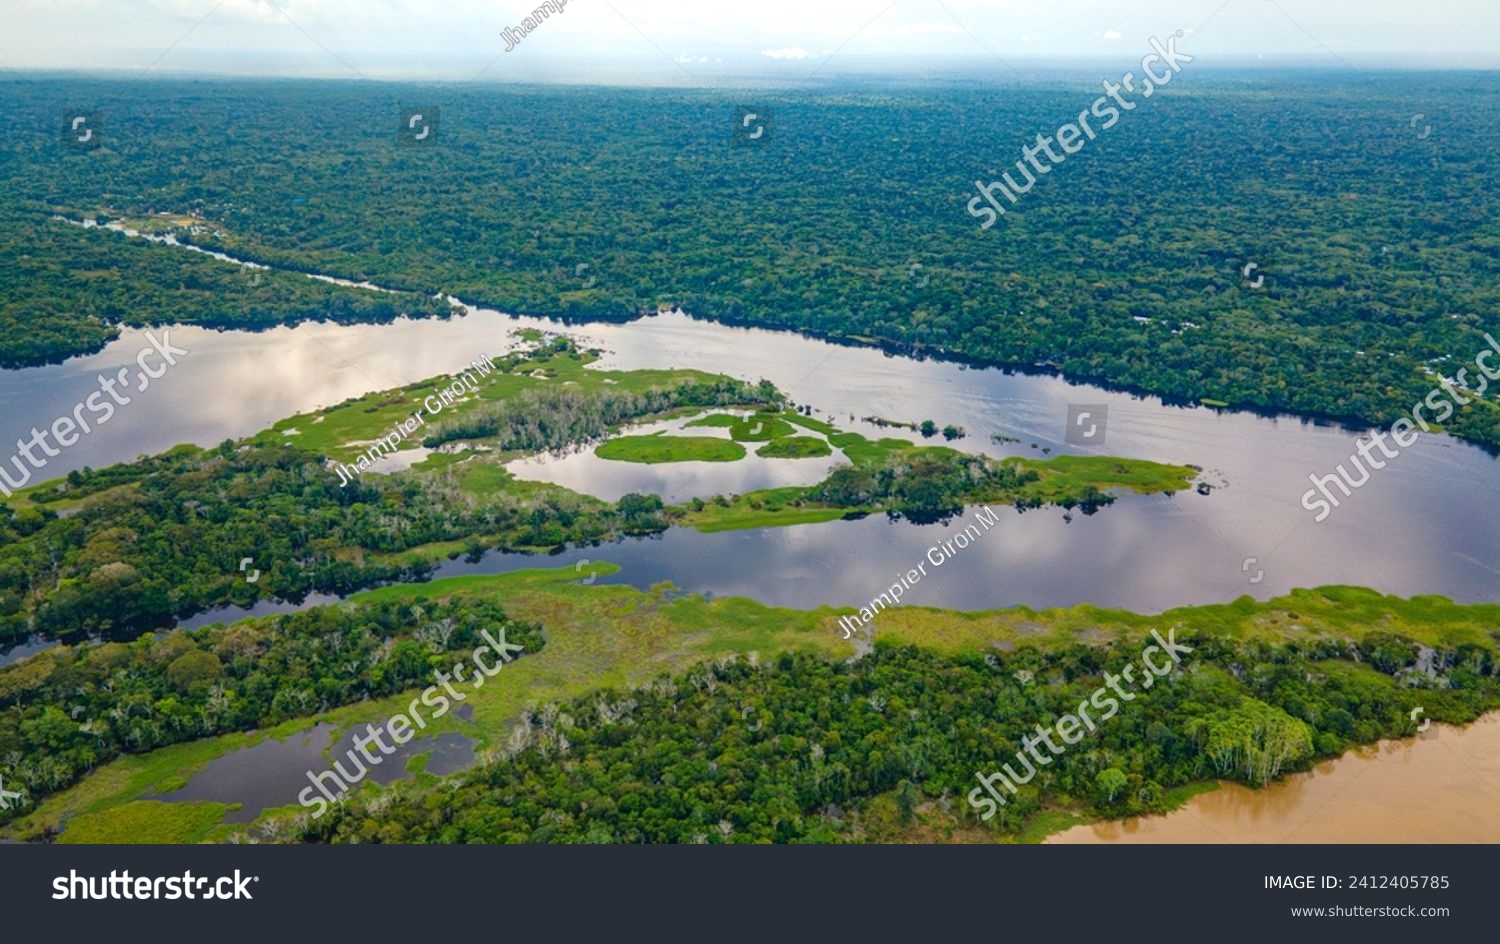 Aerial view of the lush Amazon rainforest, winding rivers, and serene lakes in Amazonas, Colombia #2412405785